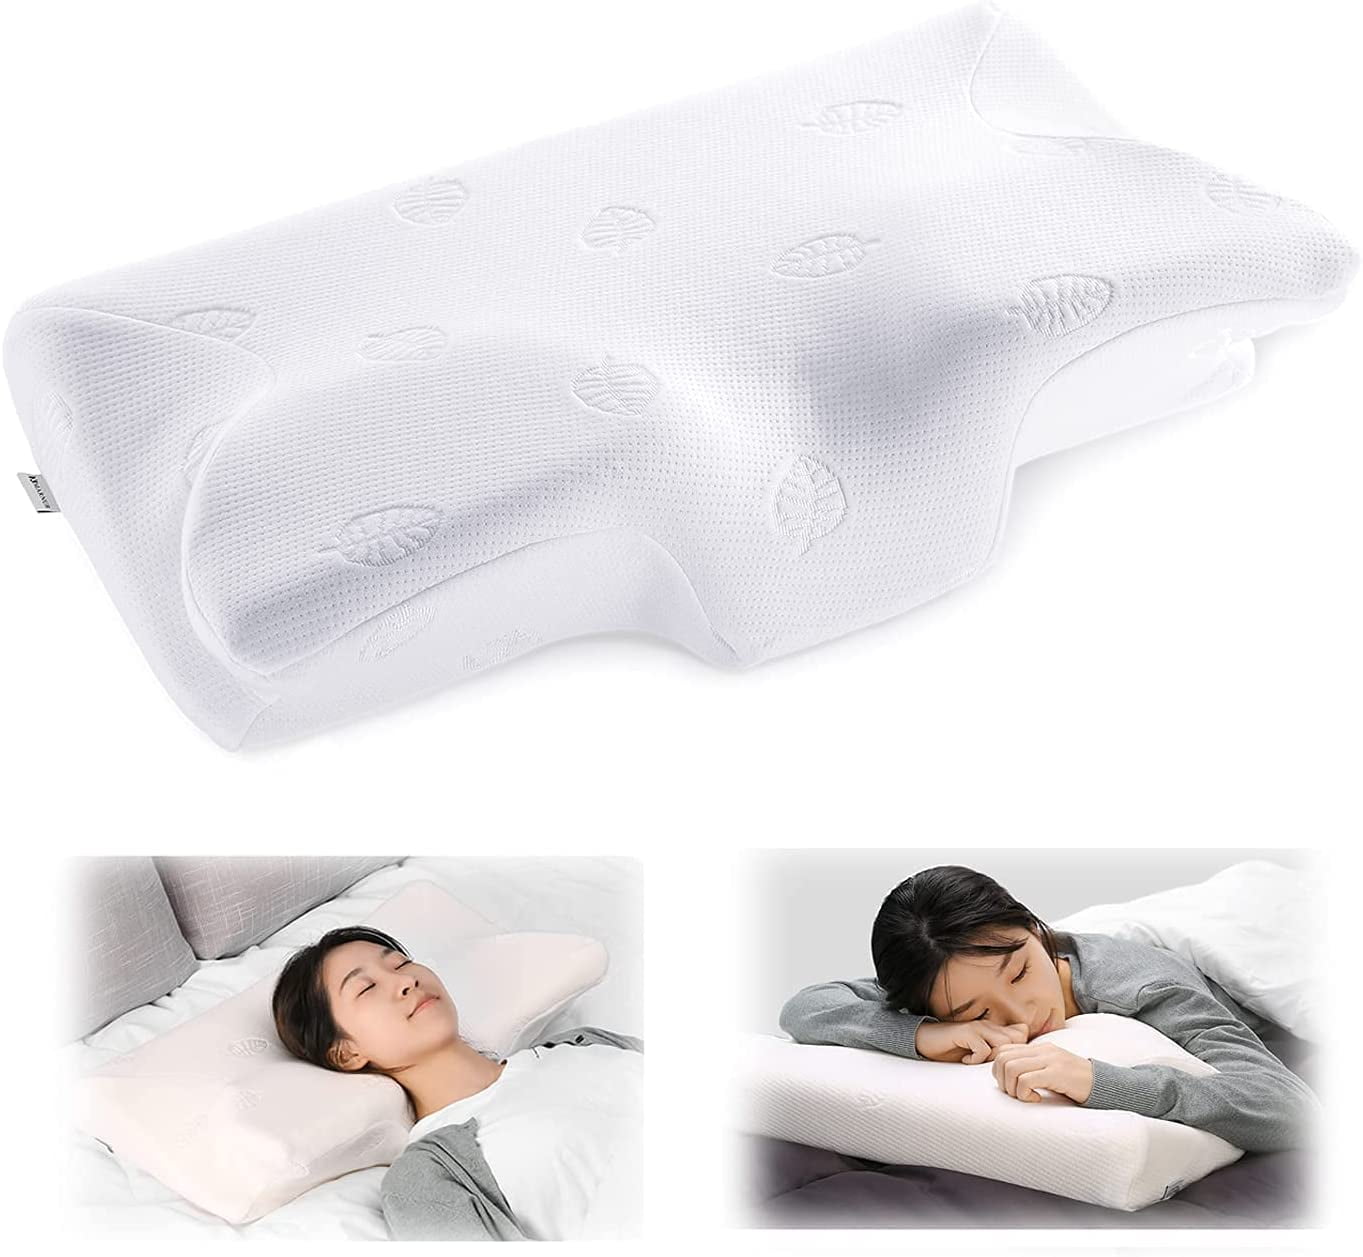 CONTOUR MEMORY BACK ORTHOPEDIC FOAM COMFORTABLE NECK SUPPORT PAIN RELIEF PILLOW 